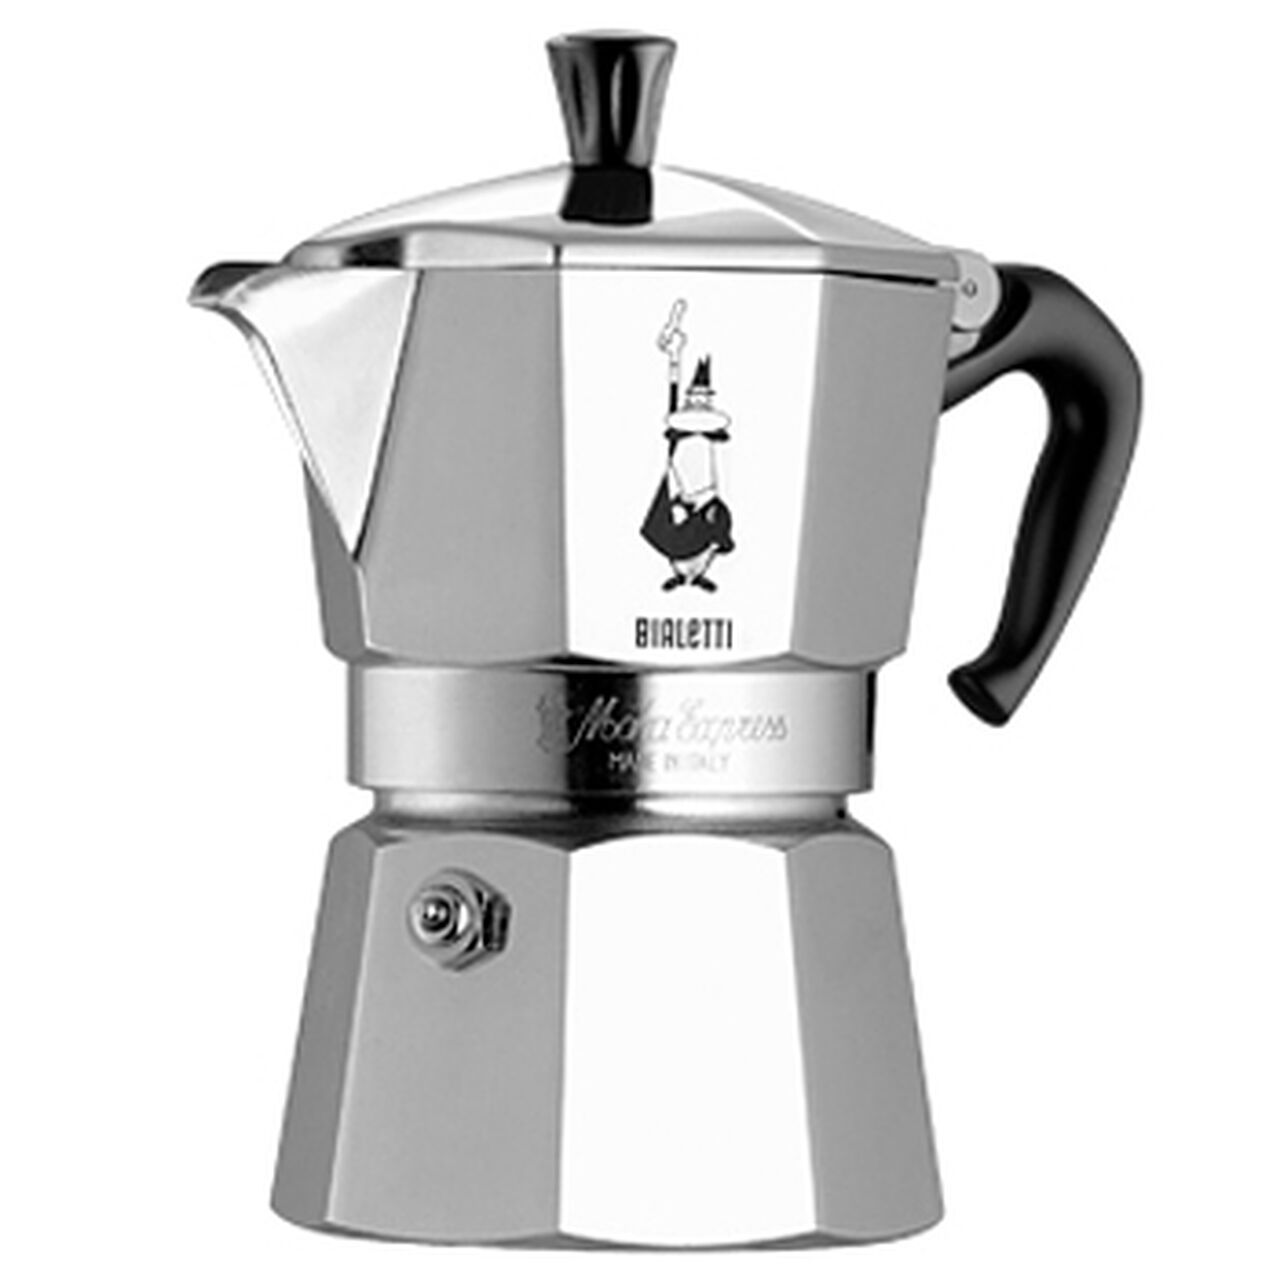 Bialetti Moka Express - 6 cup Espresso maker  #06800, , large image number 0